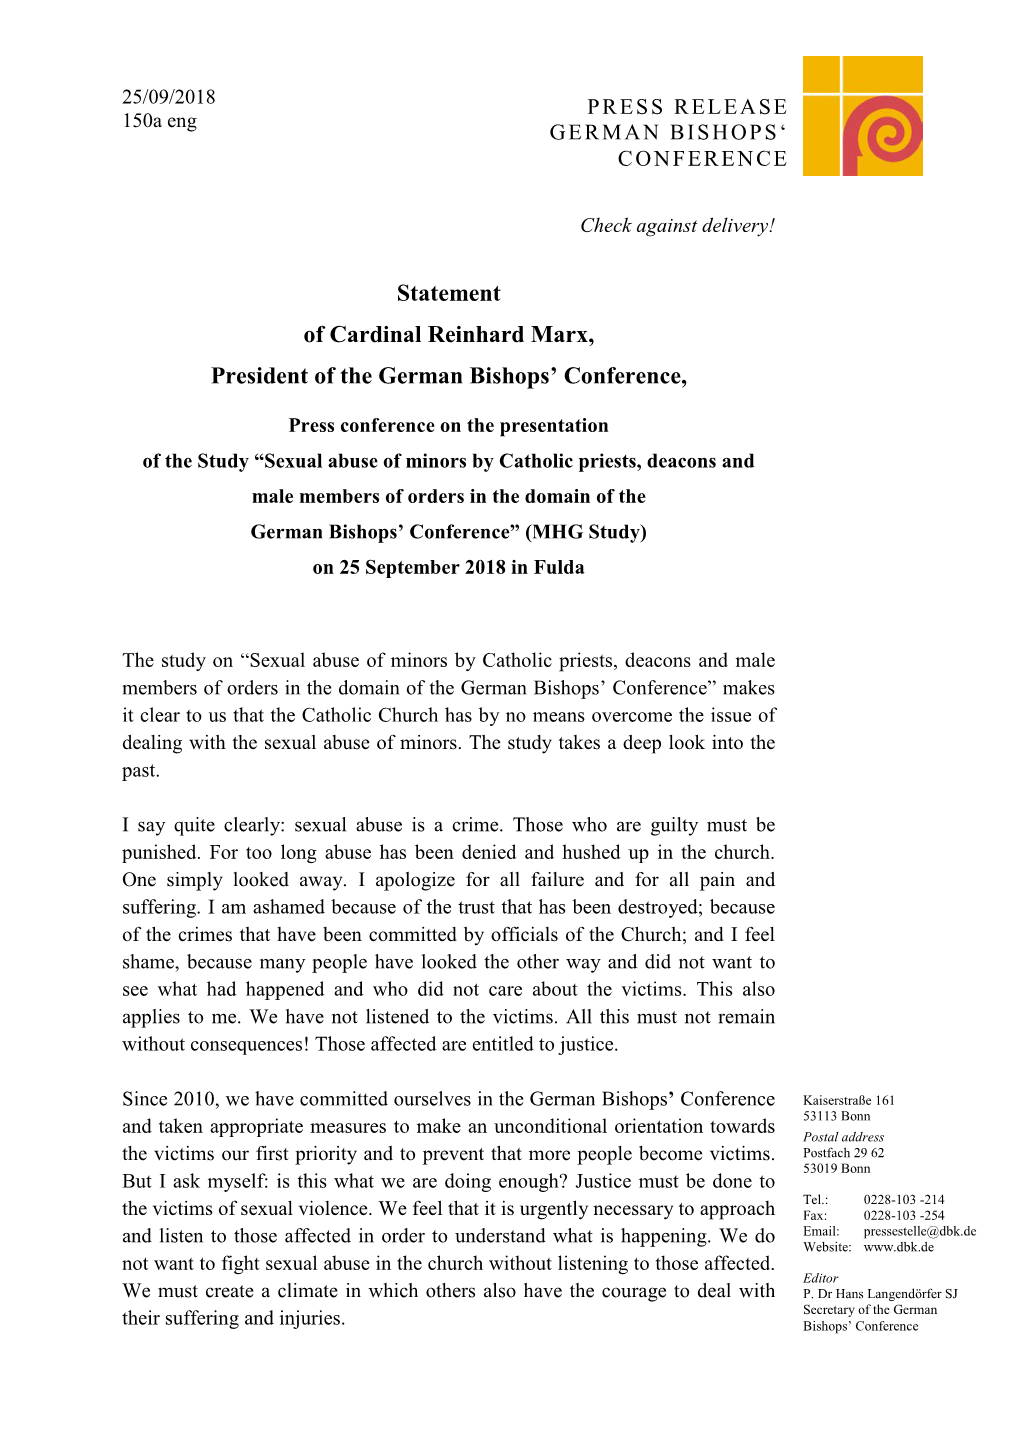 Statement of Cardinal Reinhard Marx, President of the German Bishops’ Conference